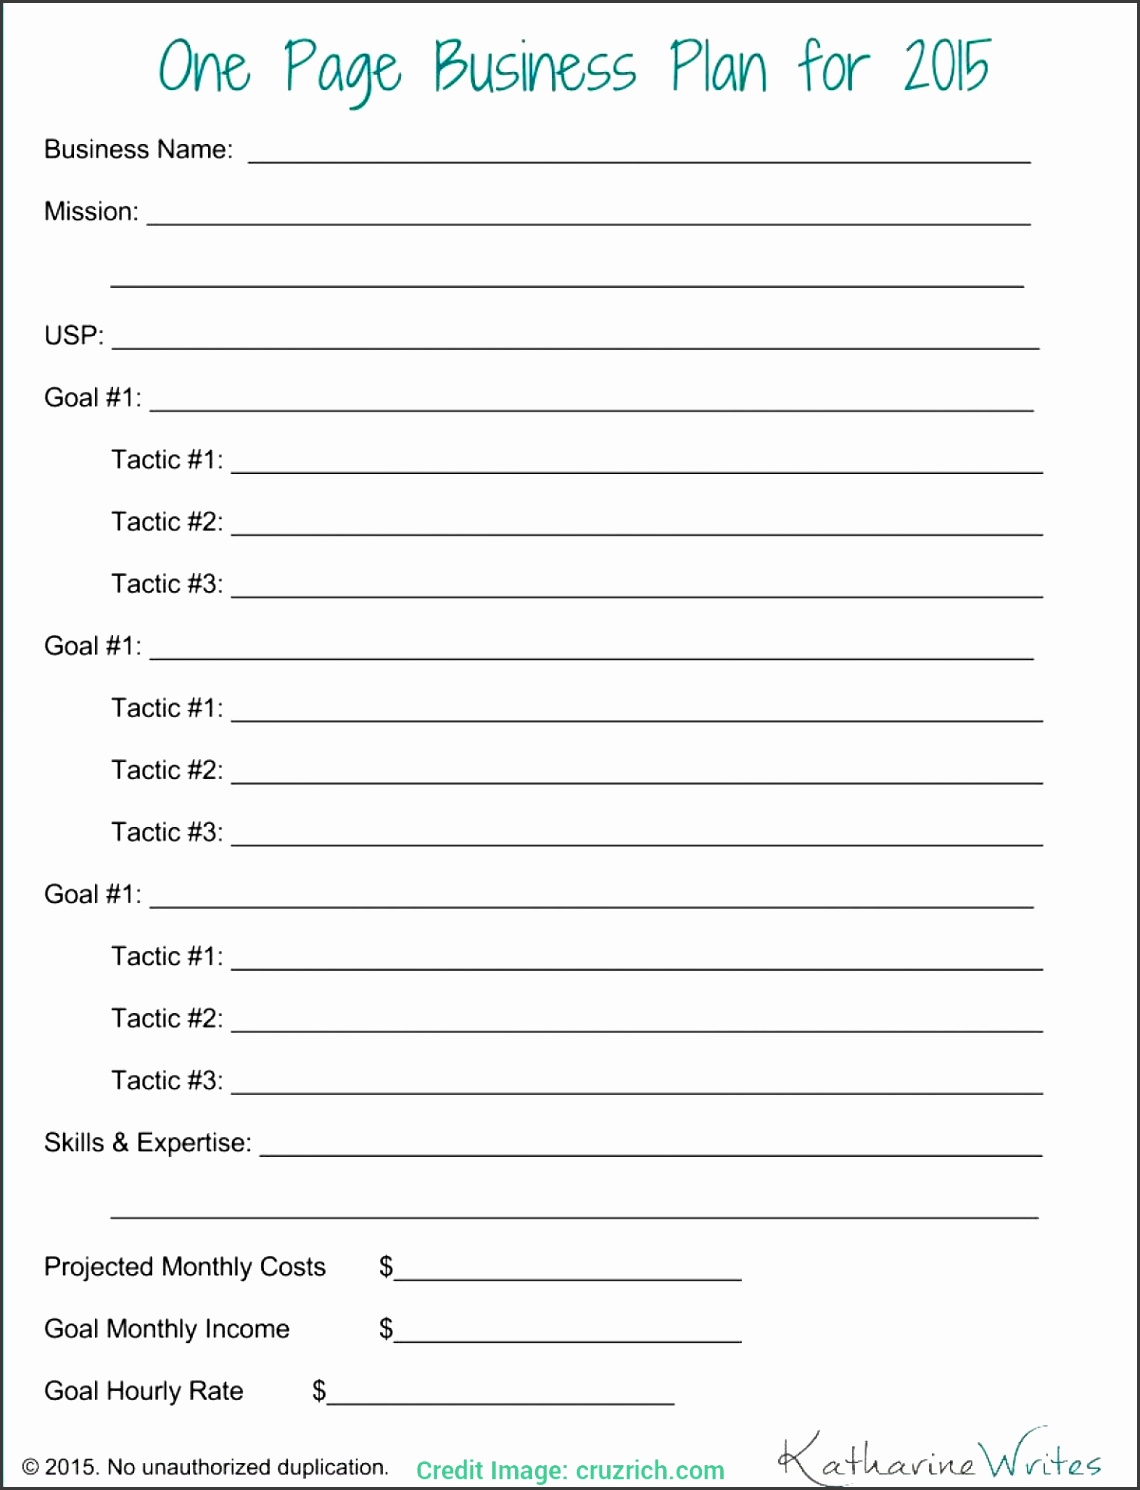 printable-one-pager-template-blank